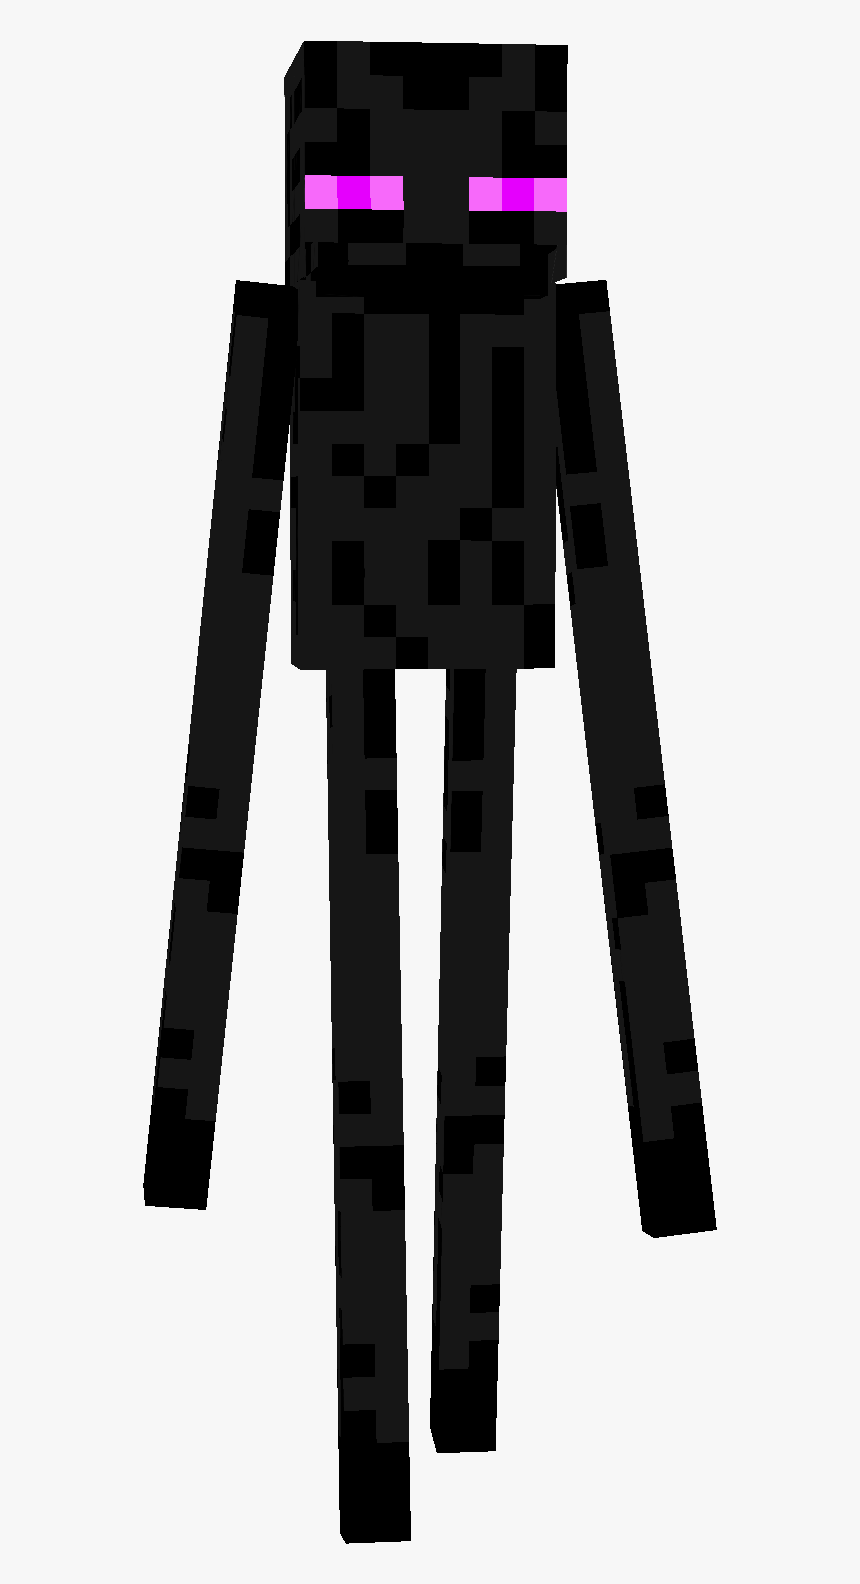 Enderman Minecraft, HD Png Download, Free Download